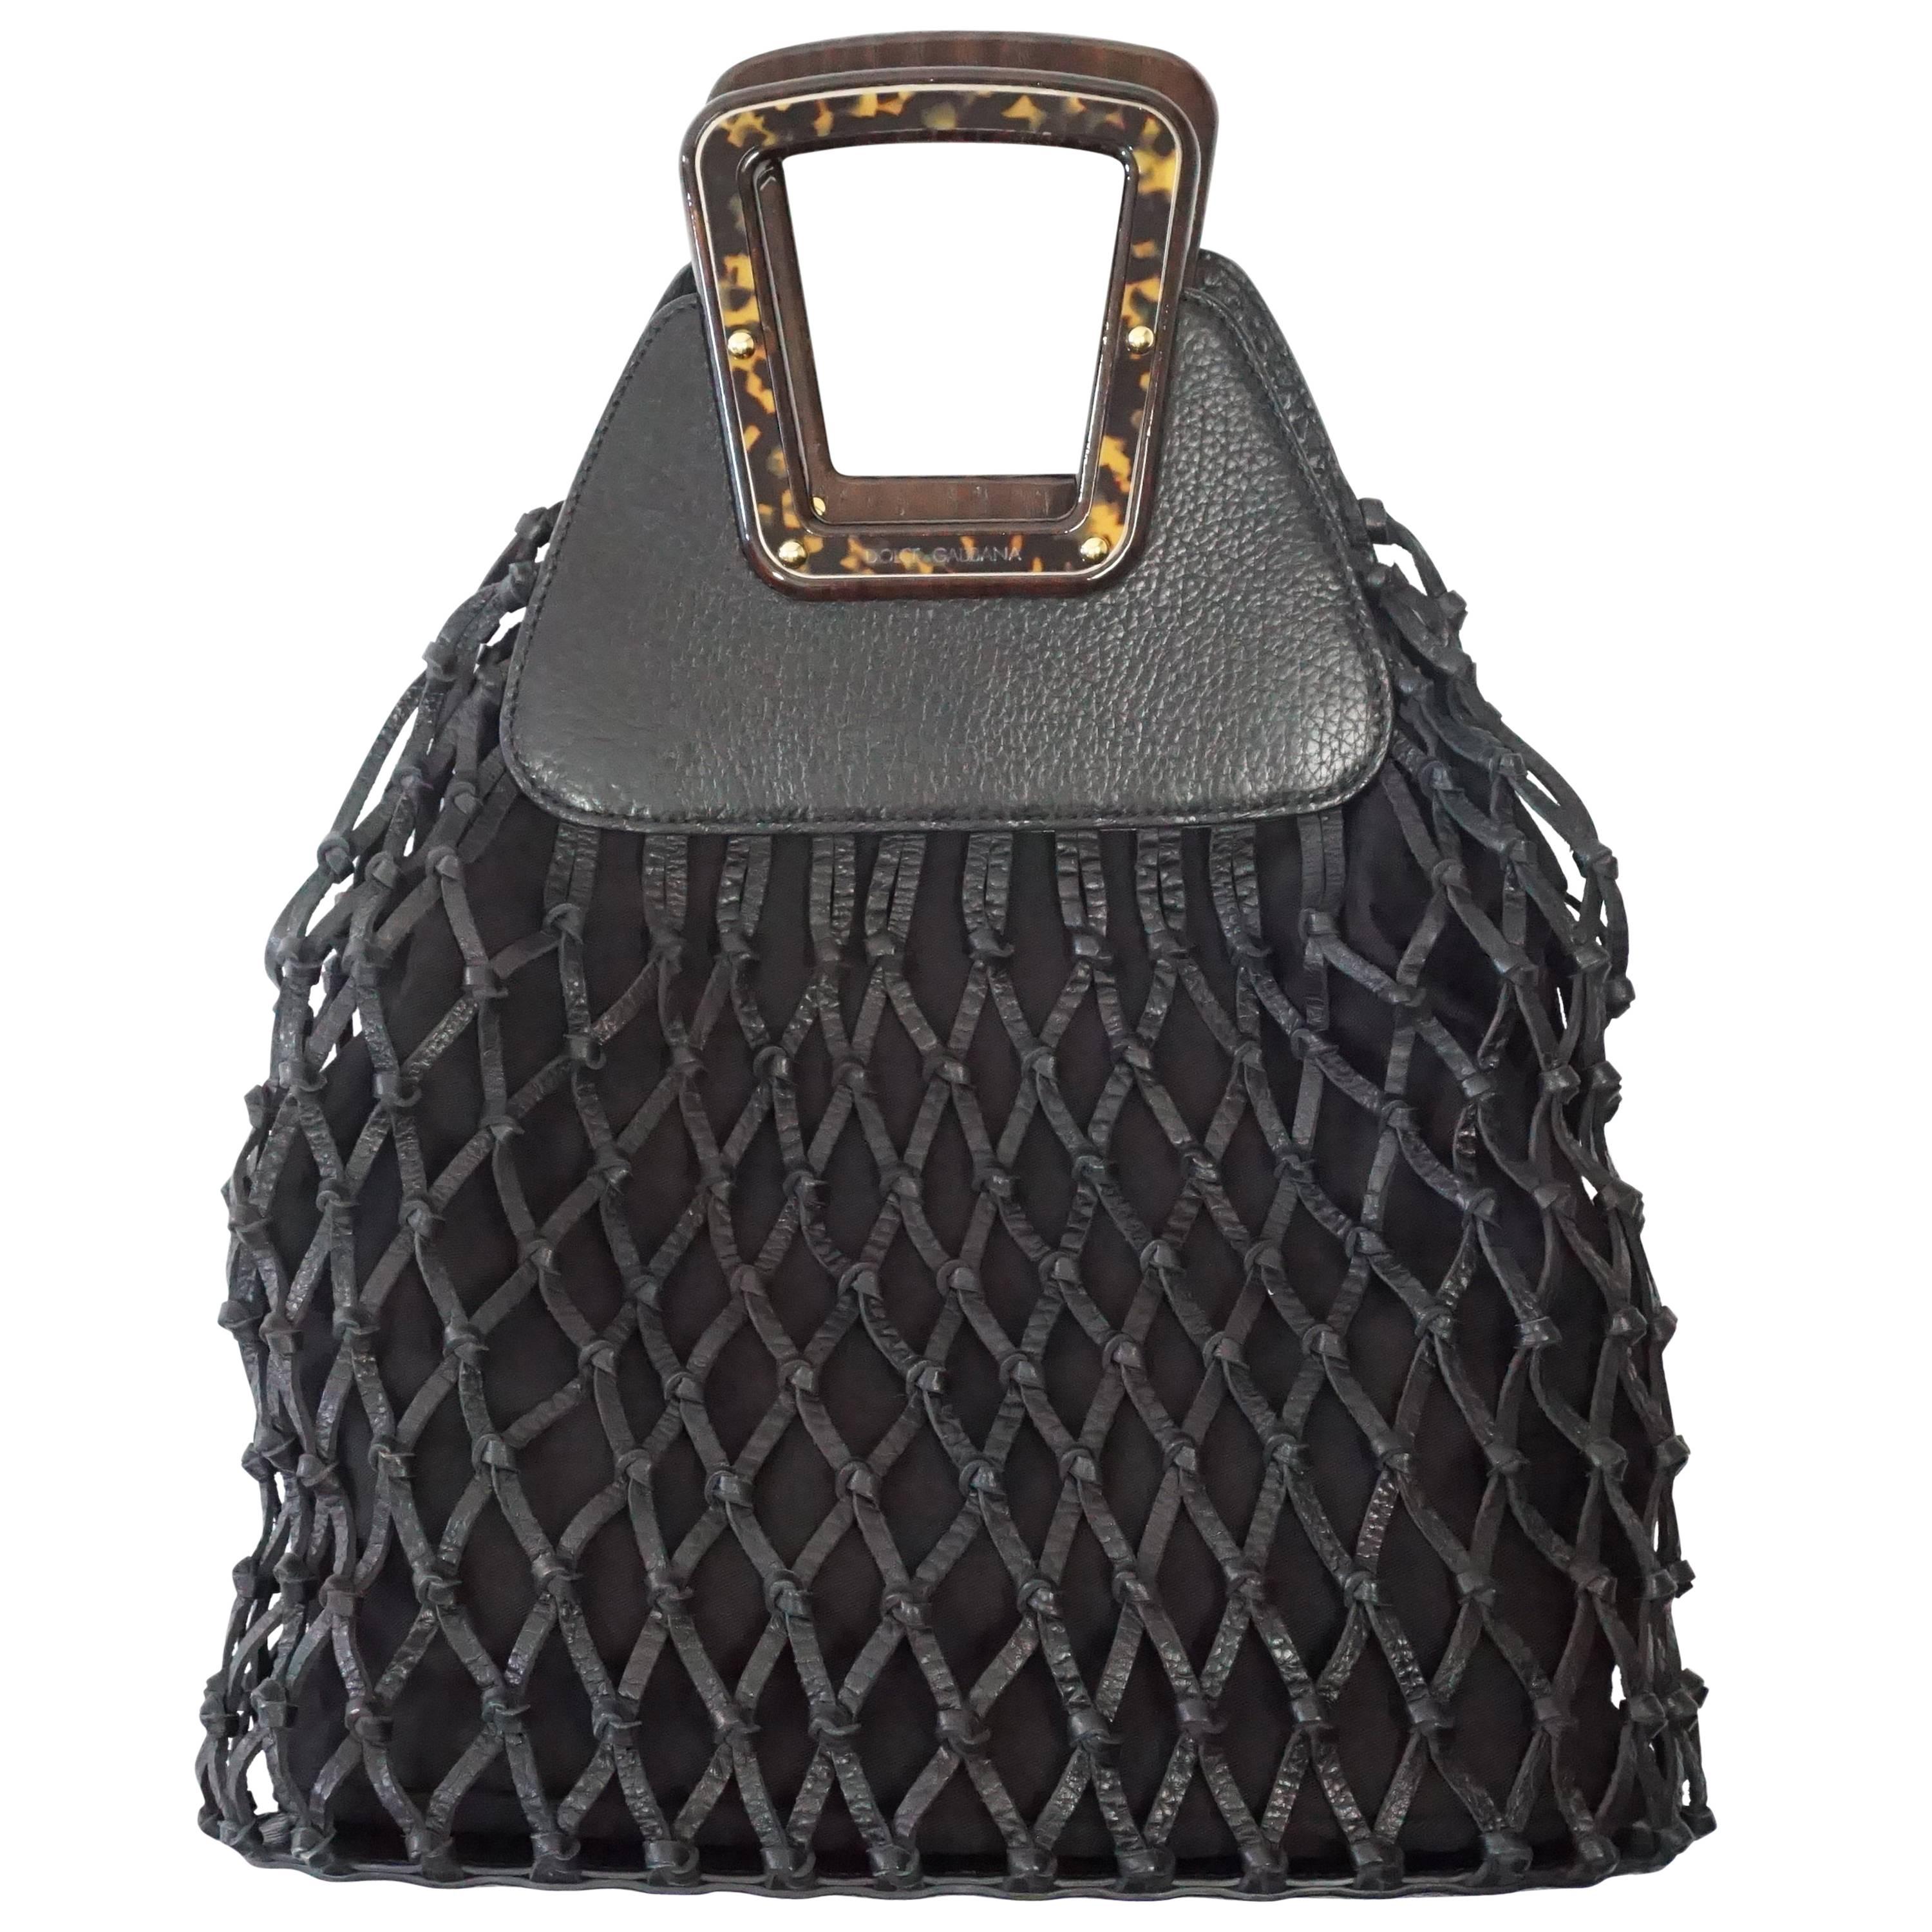 Dolce and Gabbana Black Woven Leather Tote with Tortoise Wood Handle at ...